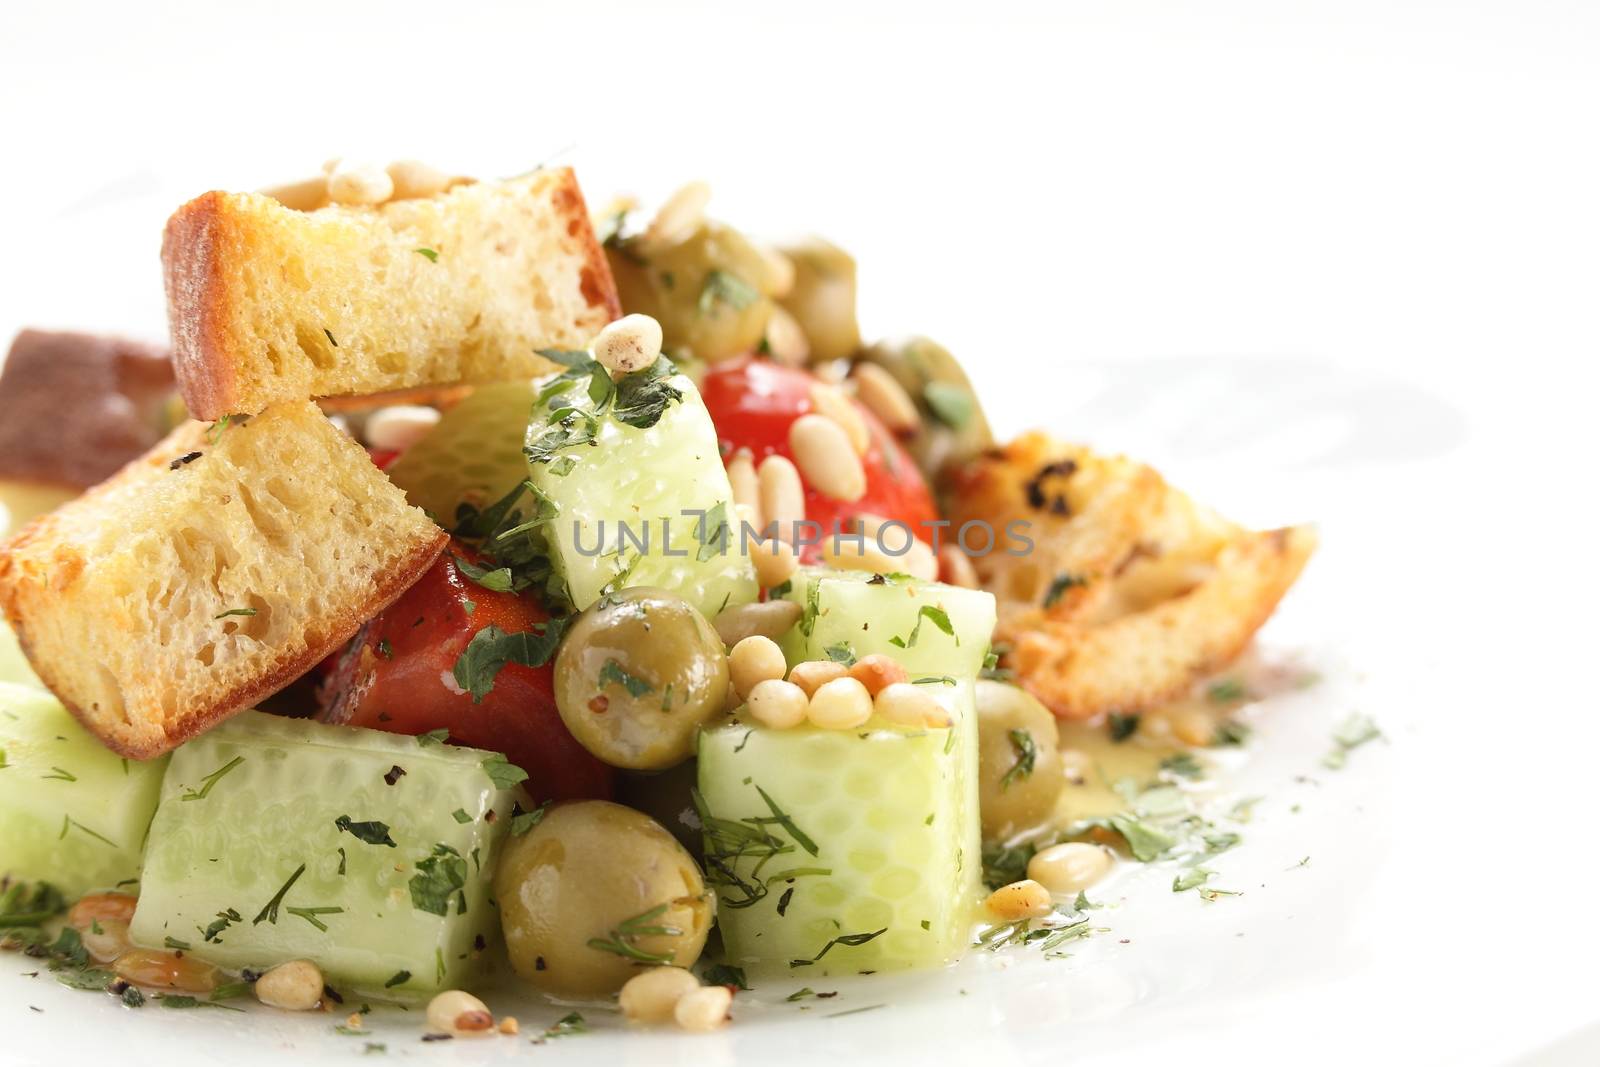 tasty salad with vegetables by fiphoto